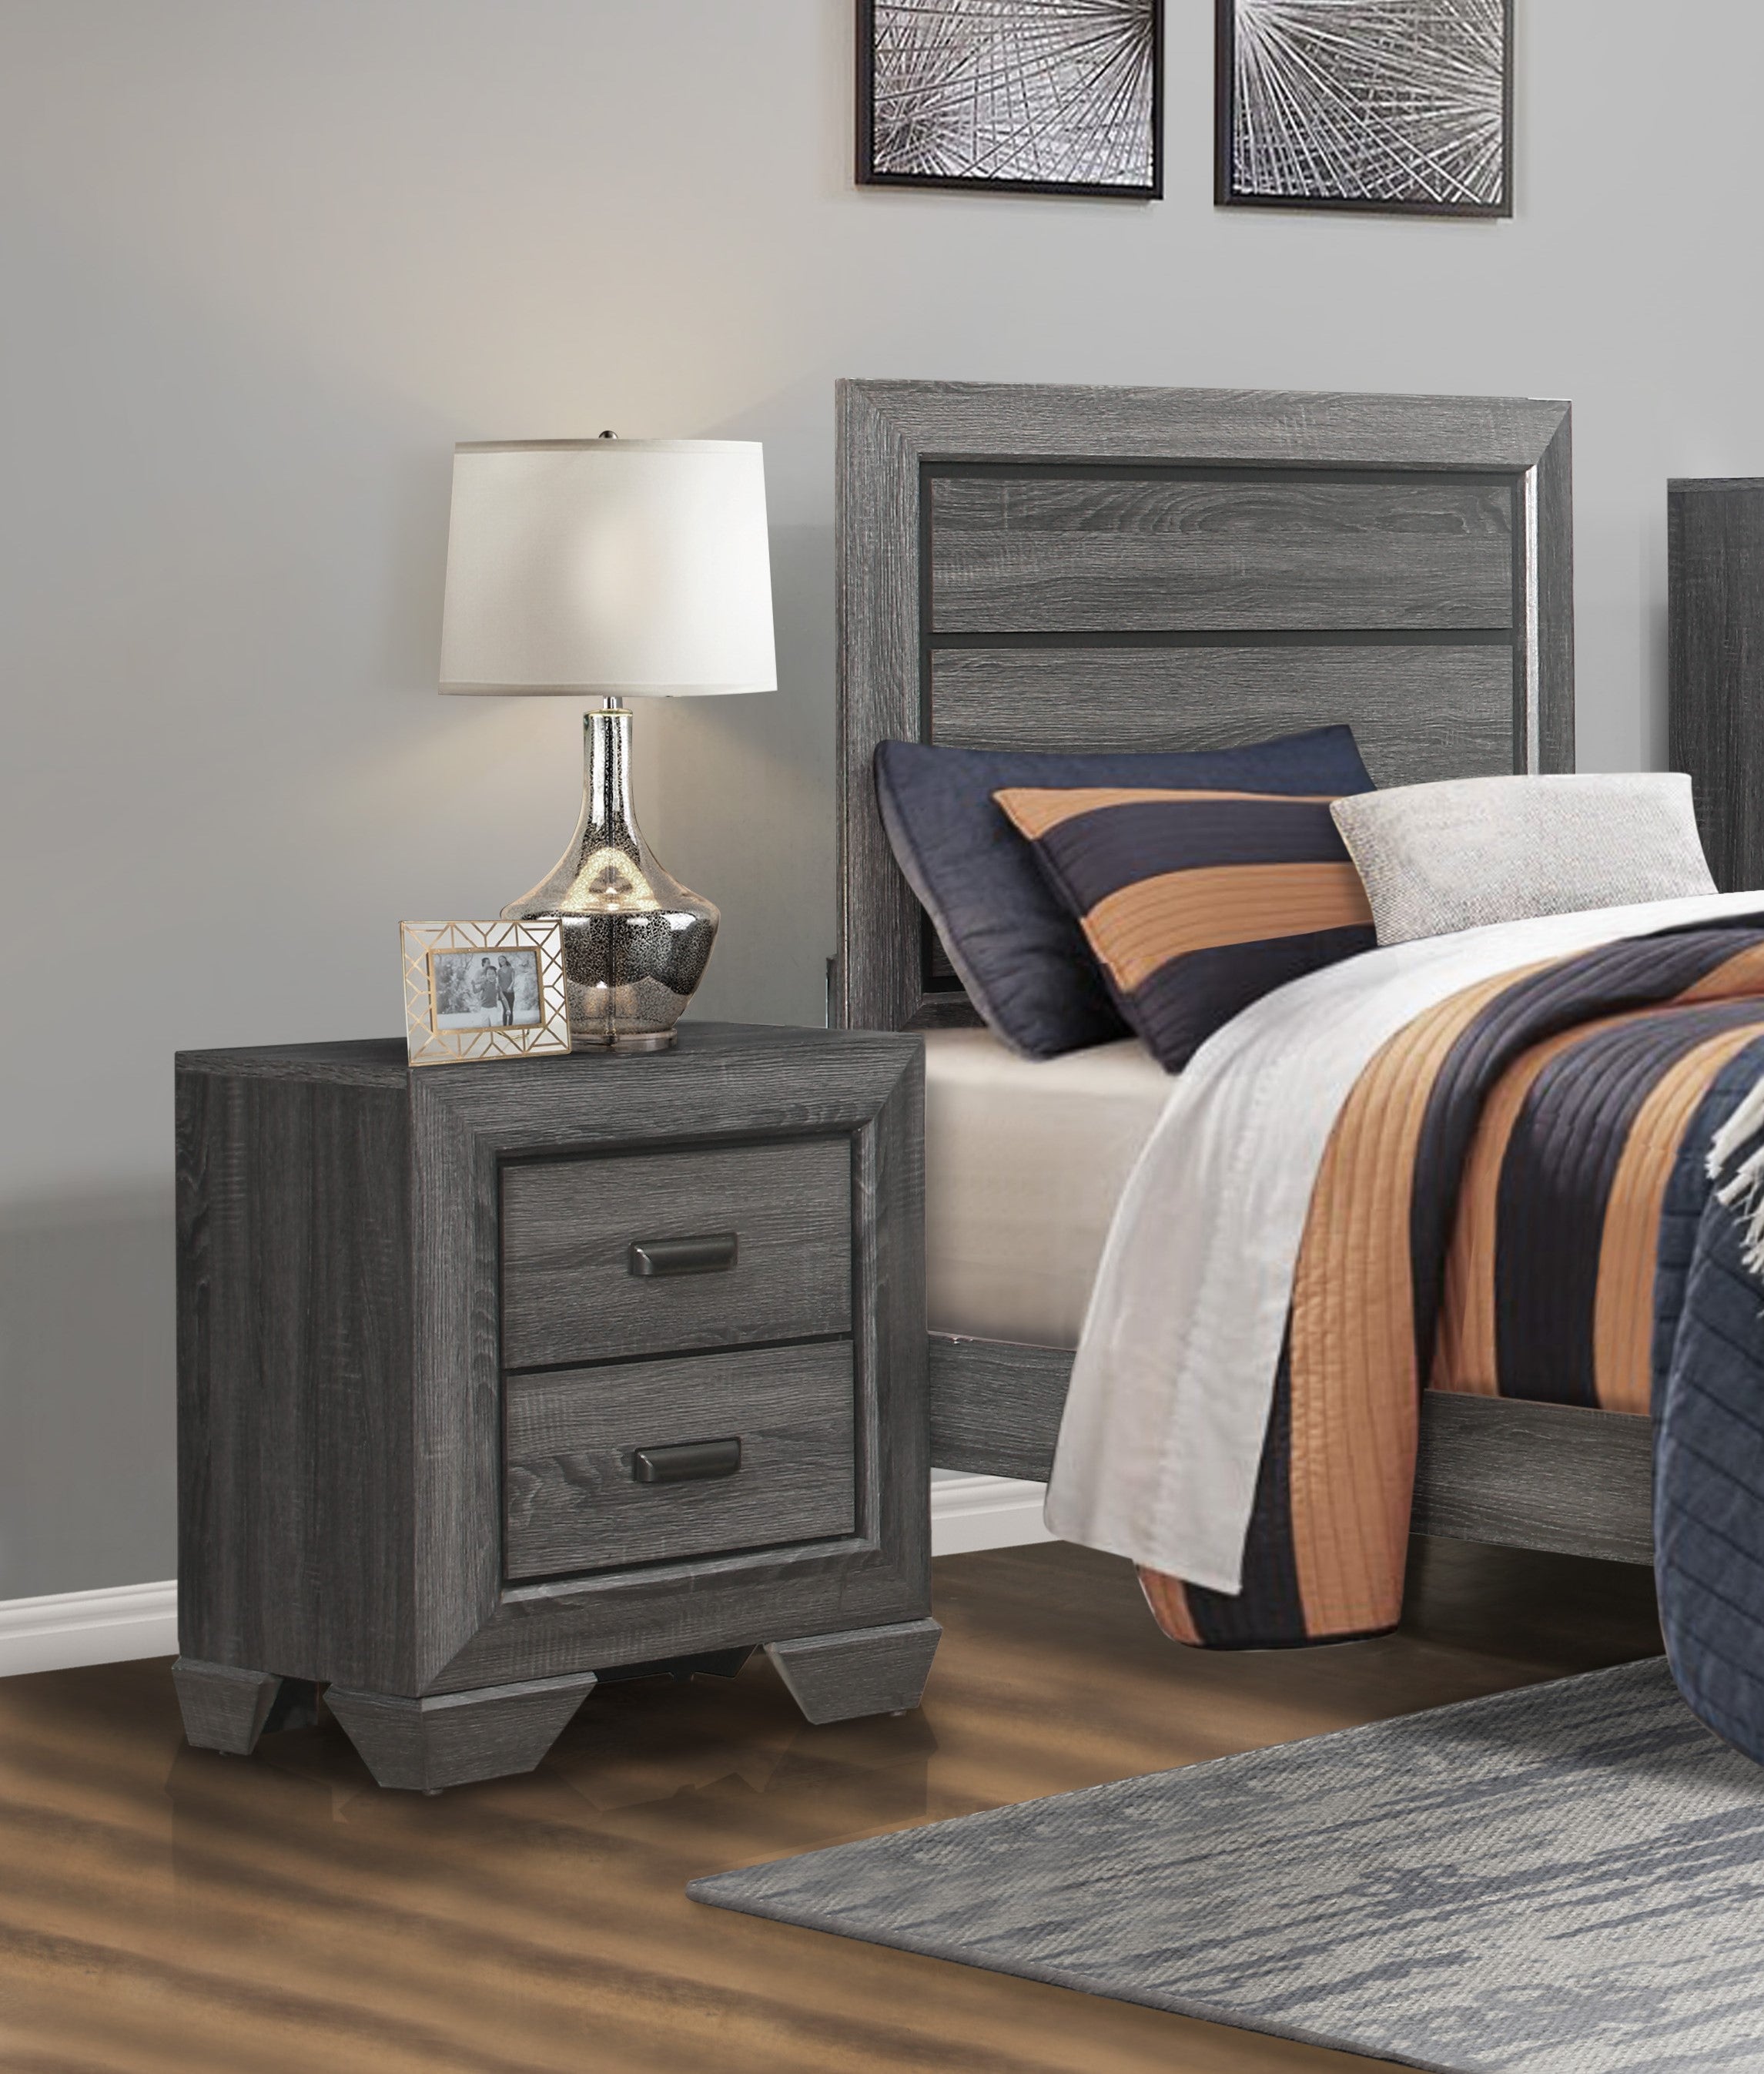 ZNTS Gray Finish 1pc Nightstand of 2x Drawers Wooden Bedroom Furniture Contemporary Design Rustic B011118701